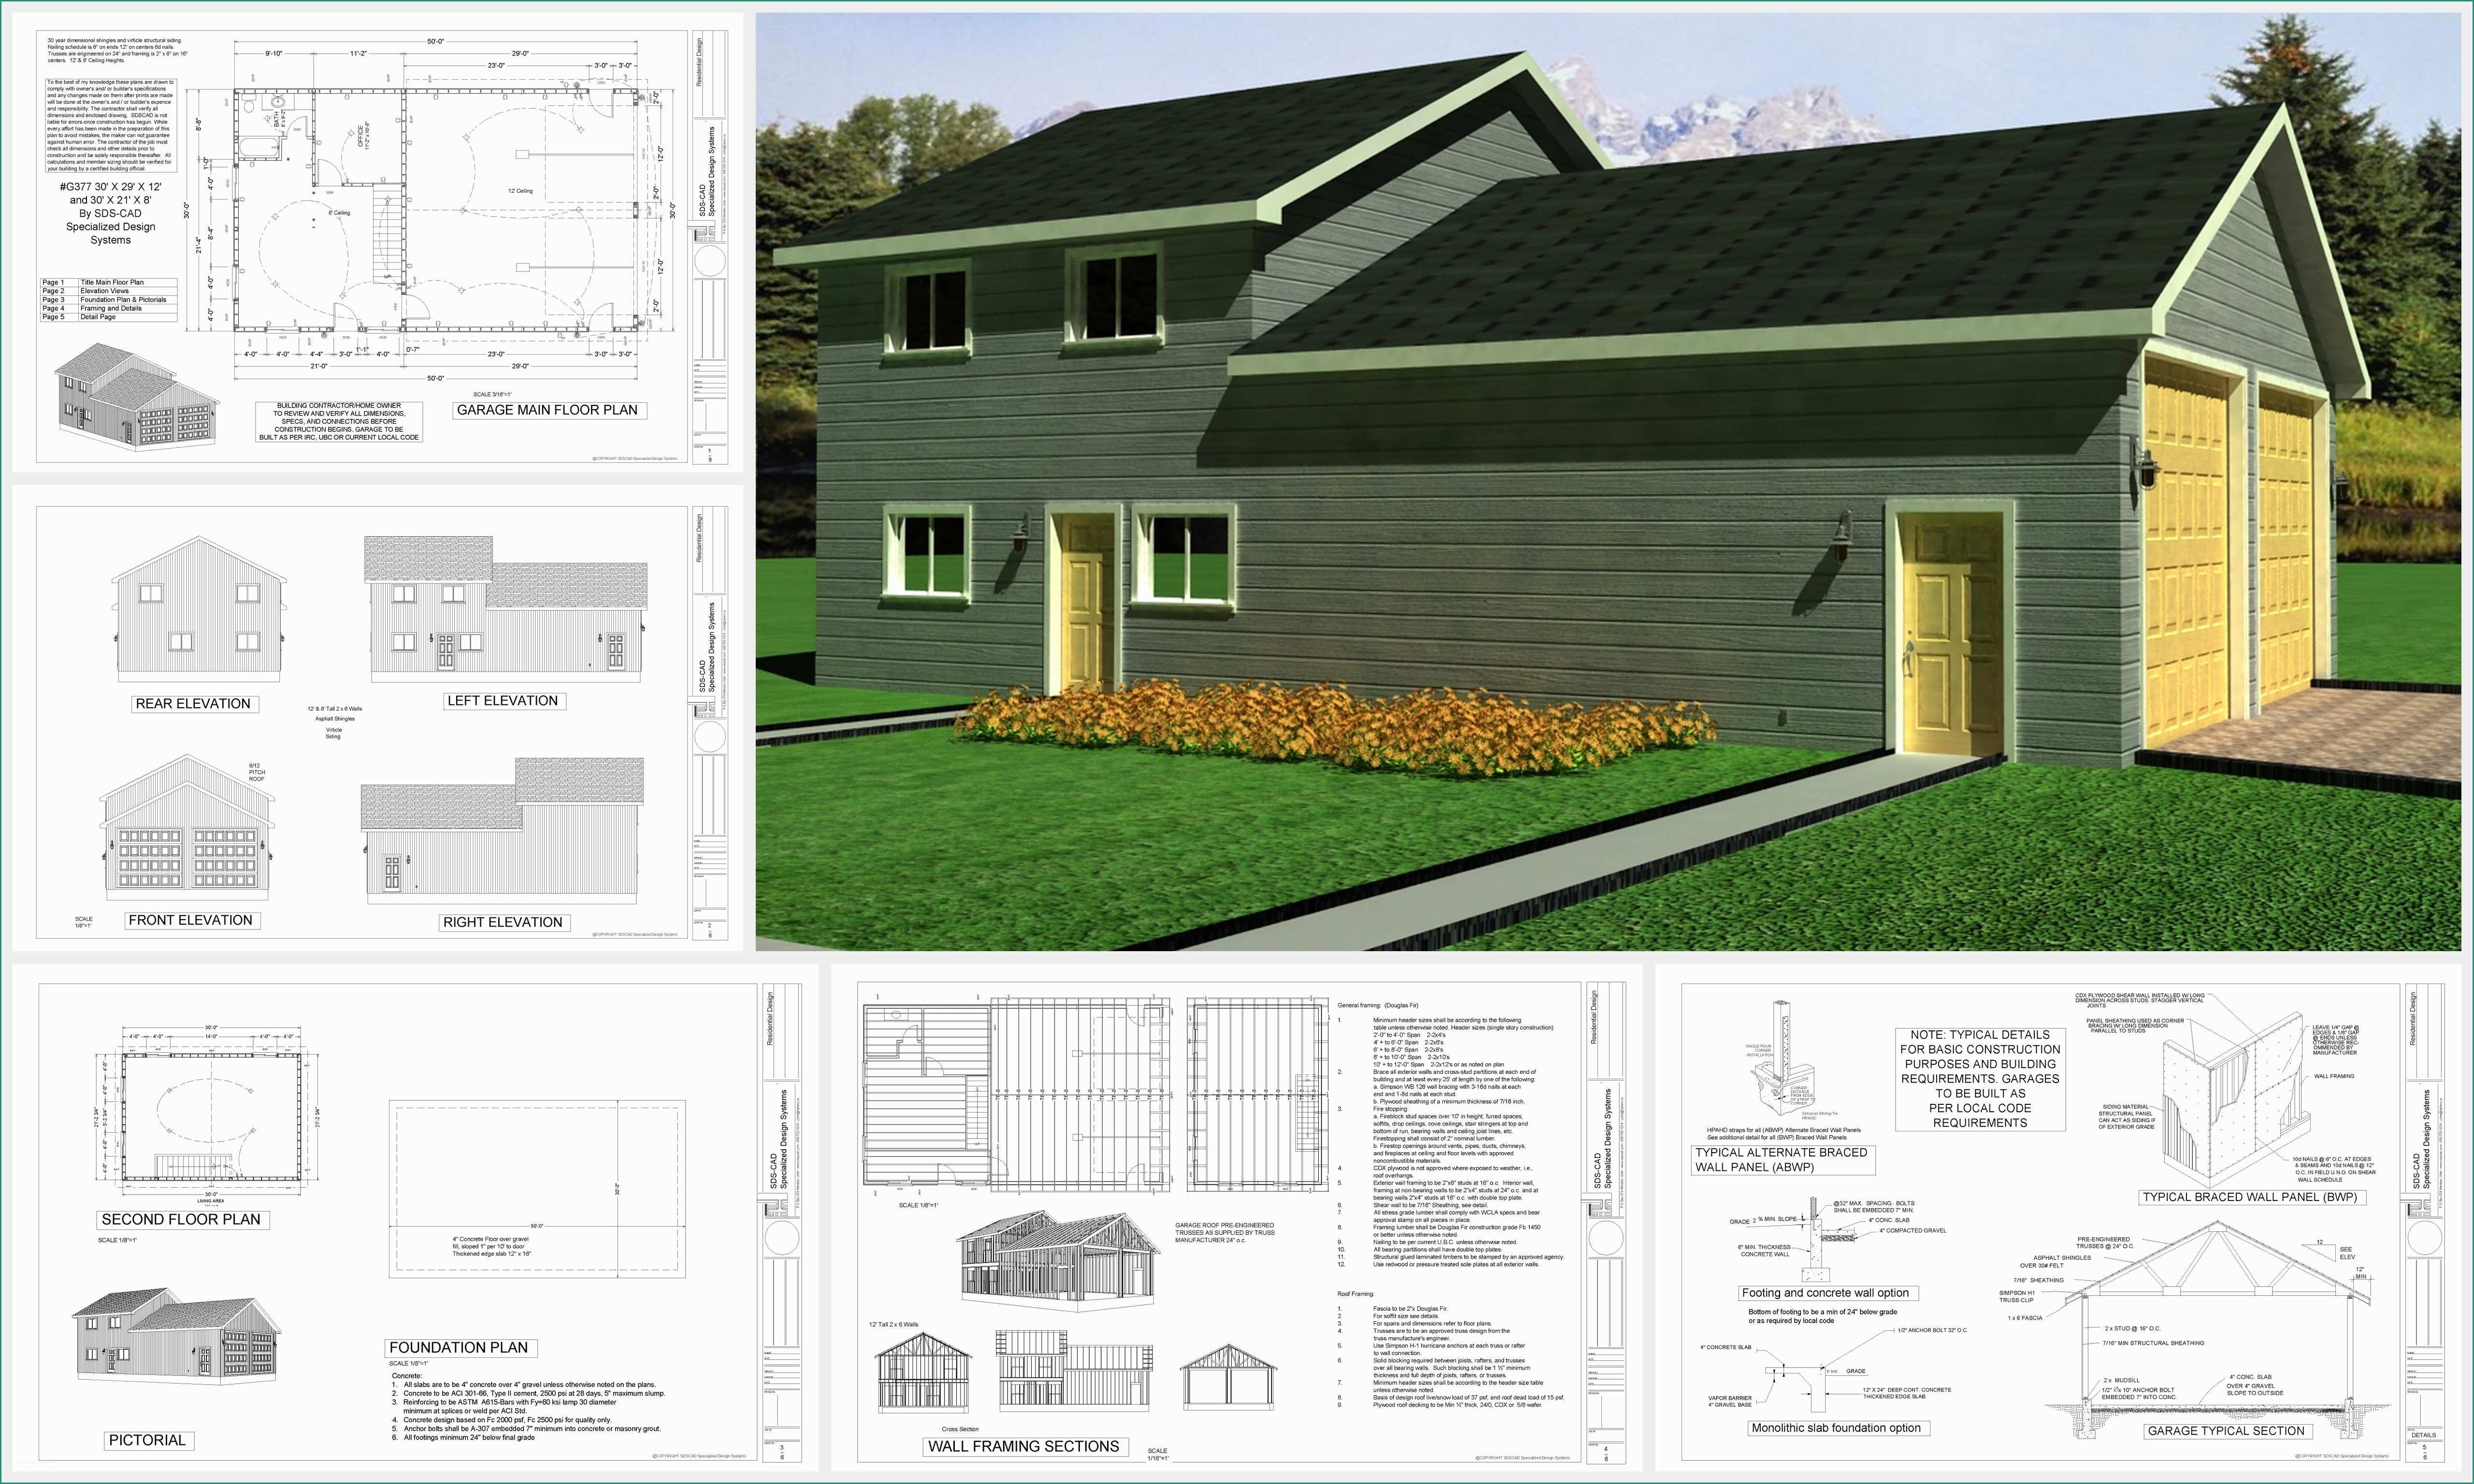 Porta Garage Dwg E Over 100 Garage and Barn Plans In Pdf Jpg and Dwg On A Dvd